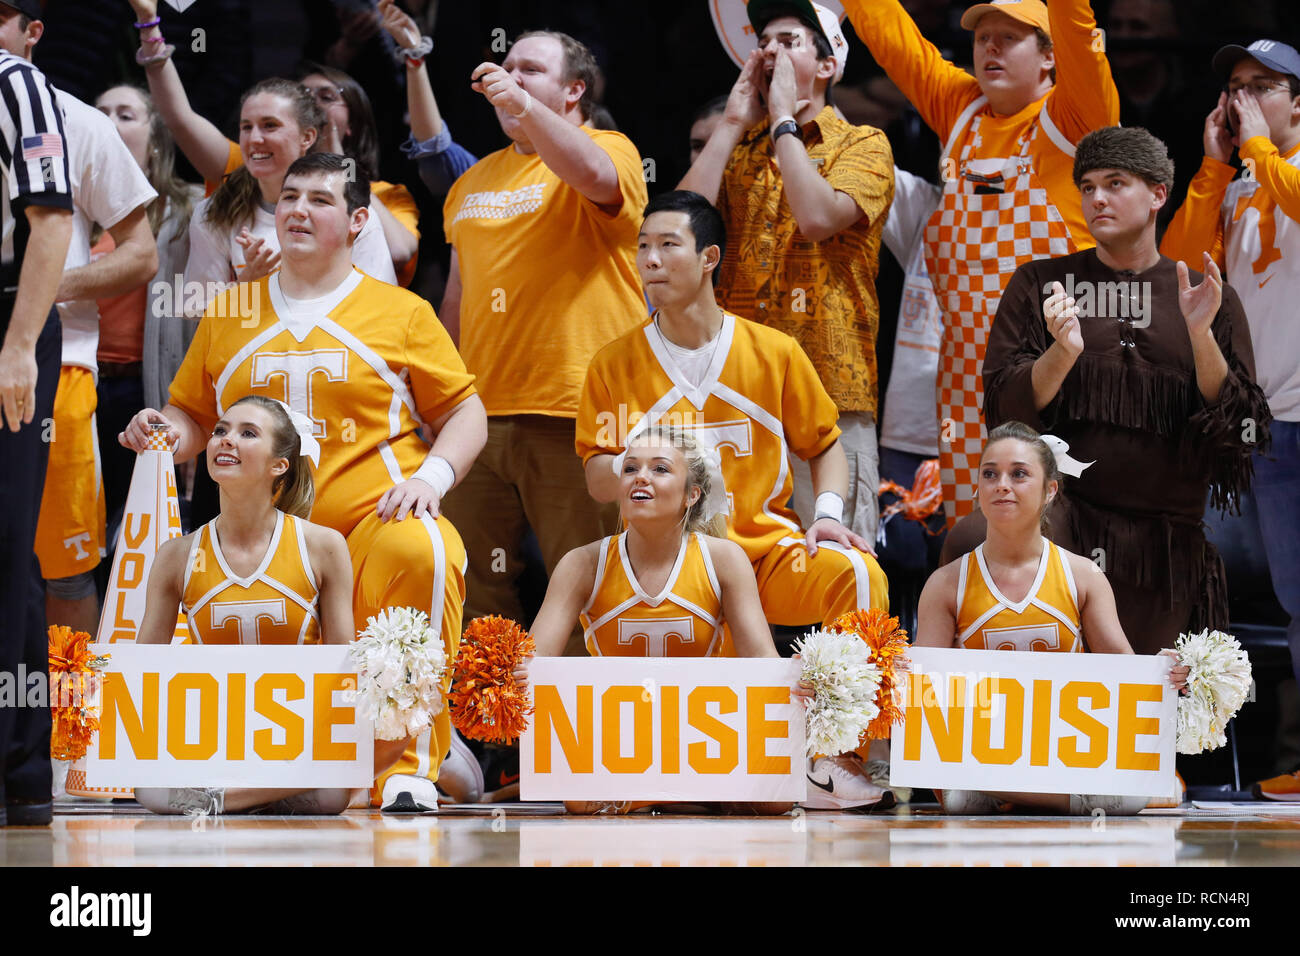 Knoxville, Tennessee, USA. January 15, 2019: Tennessee Volunteers cheerleaders during the NCAA basketball game between the University of Tennessee Volunteers and the University of Arkansas Razorbacks at Thompson Boling Arena in Knoxville TN Tim Gangloff/CSM Credit: Cal Sport Media/Alamy Live News Stock Photo